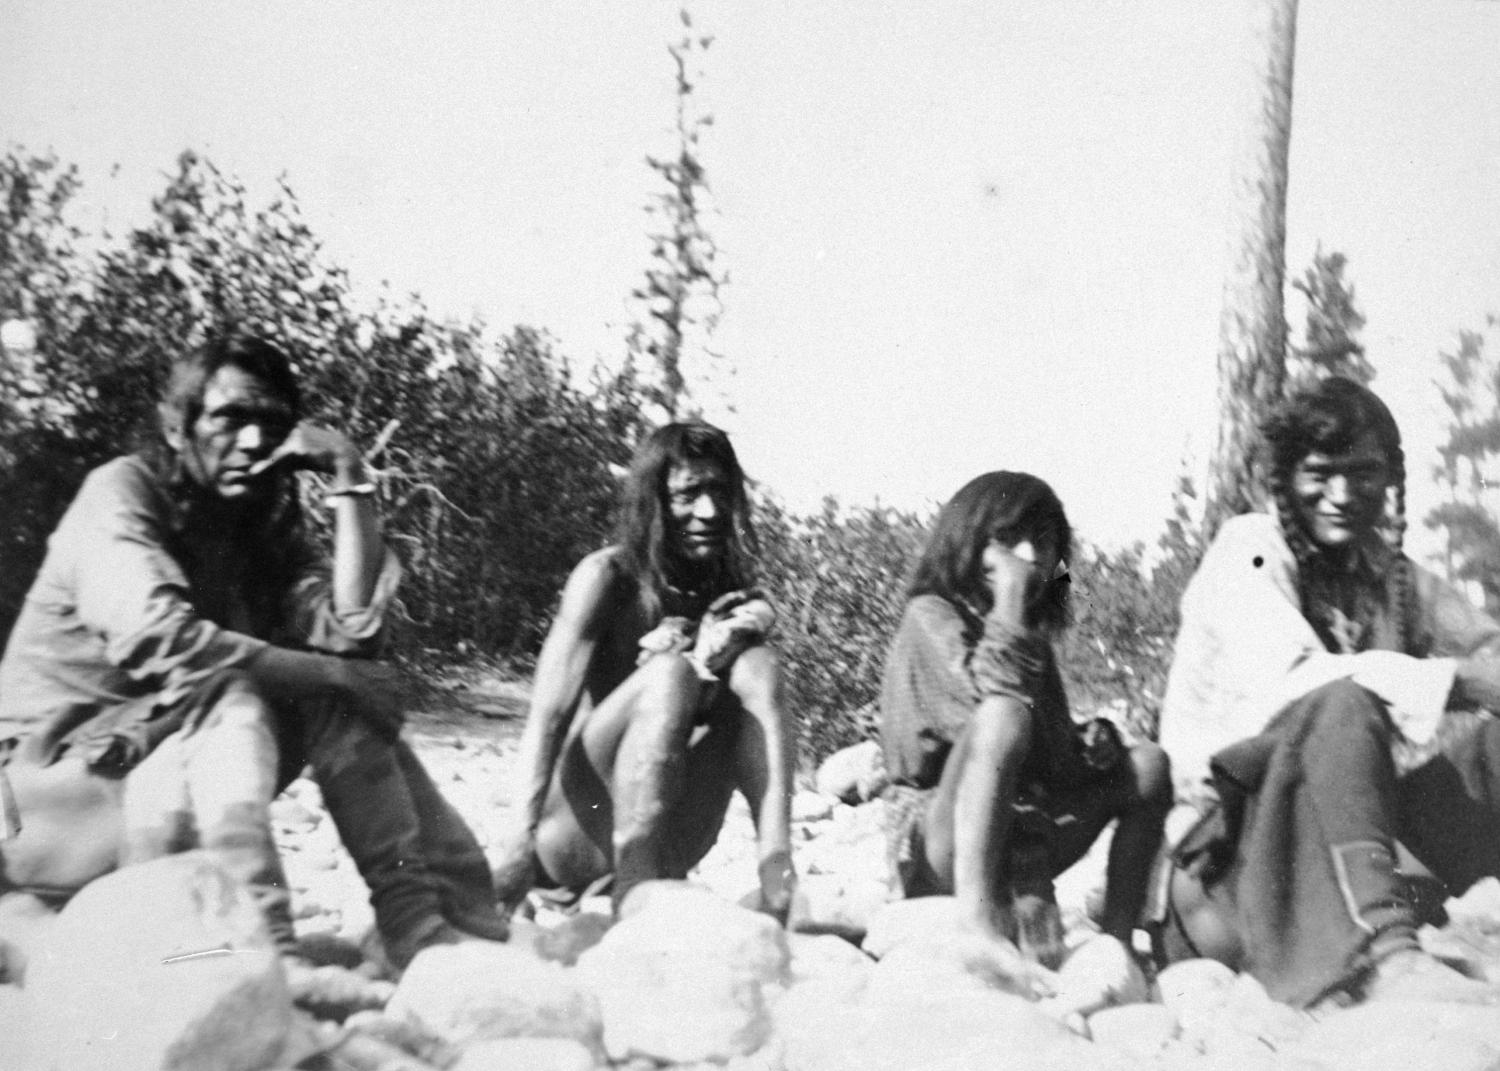 Members of the Ktunaxa First Nation sitting on rocks